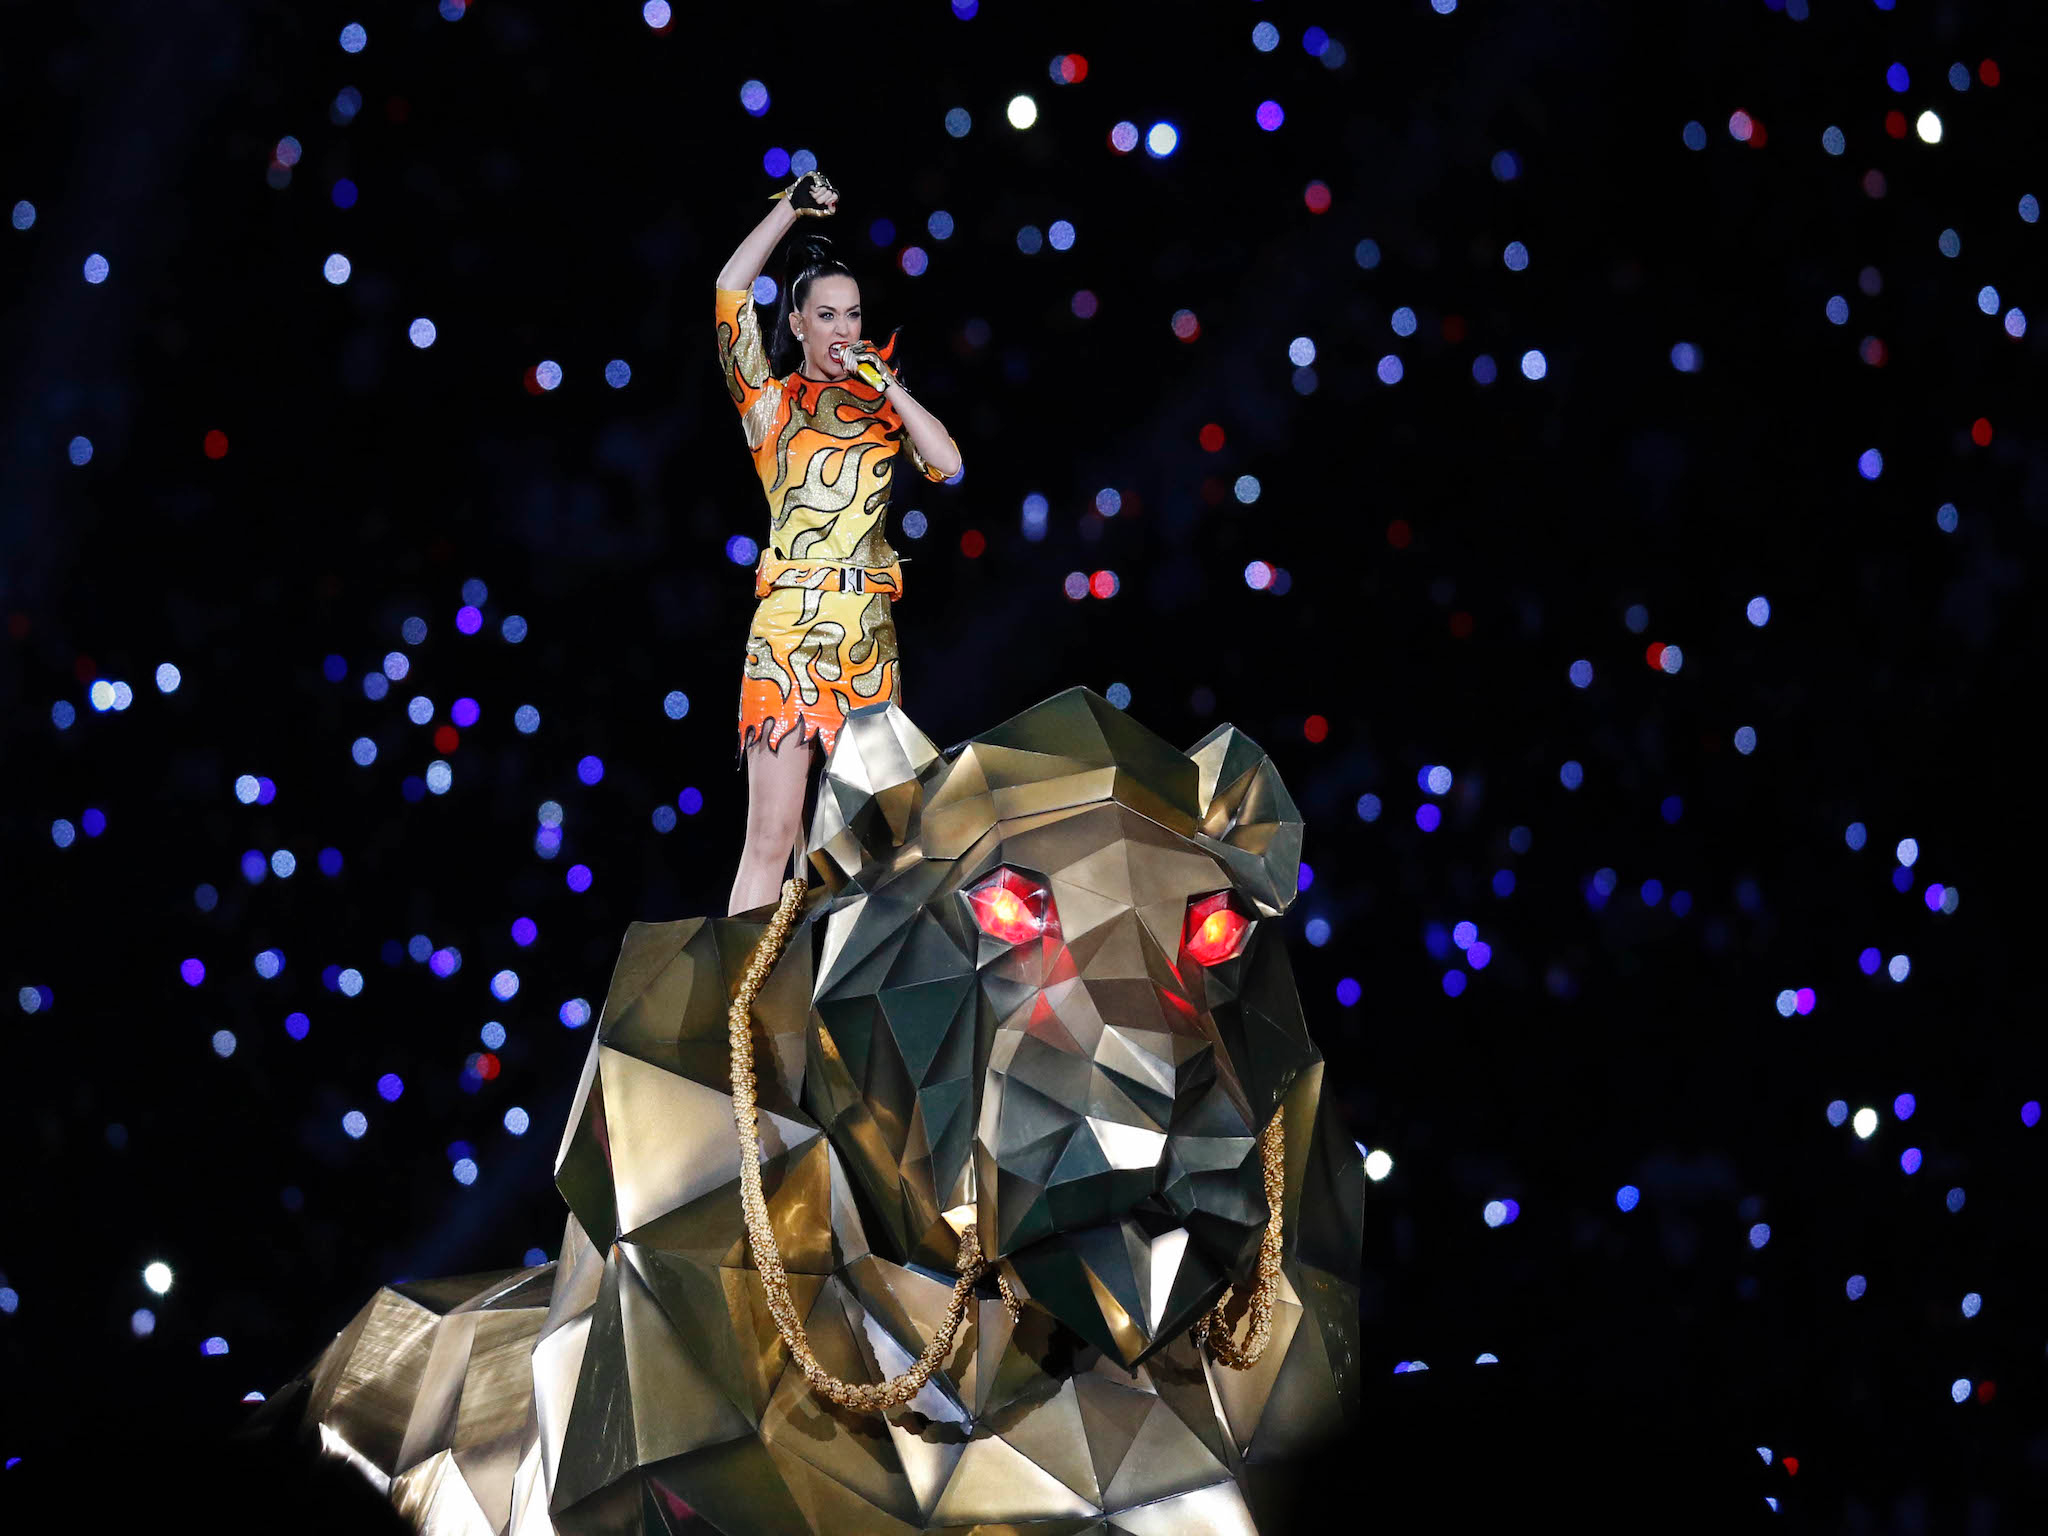 Katy Perry appeared on the back of a metallic lion (or tiger) during her Super Bowl performance